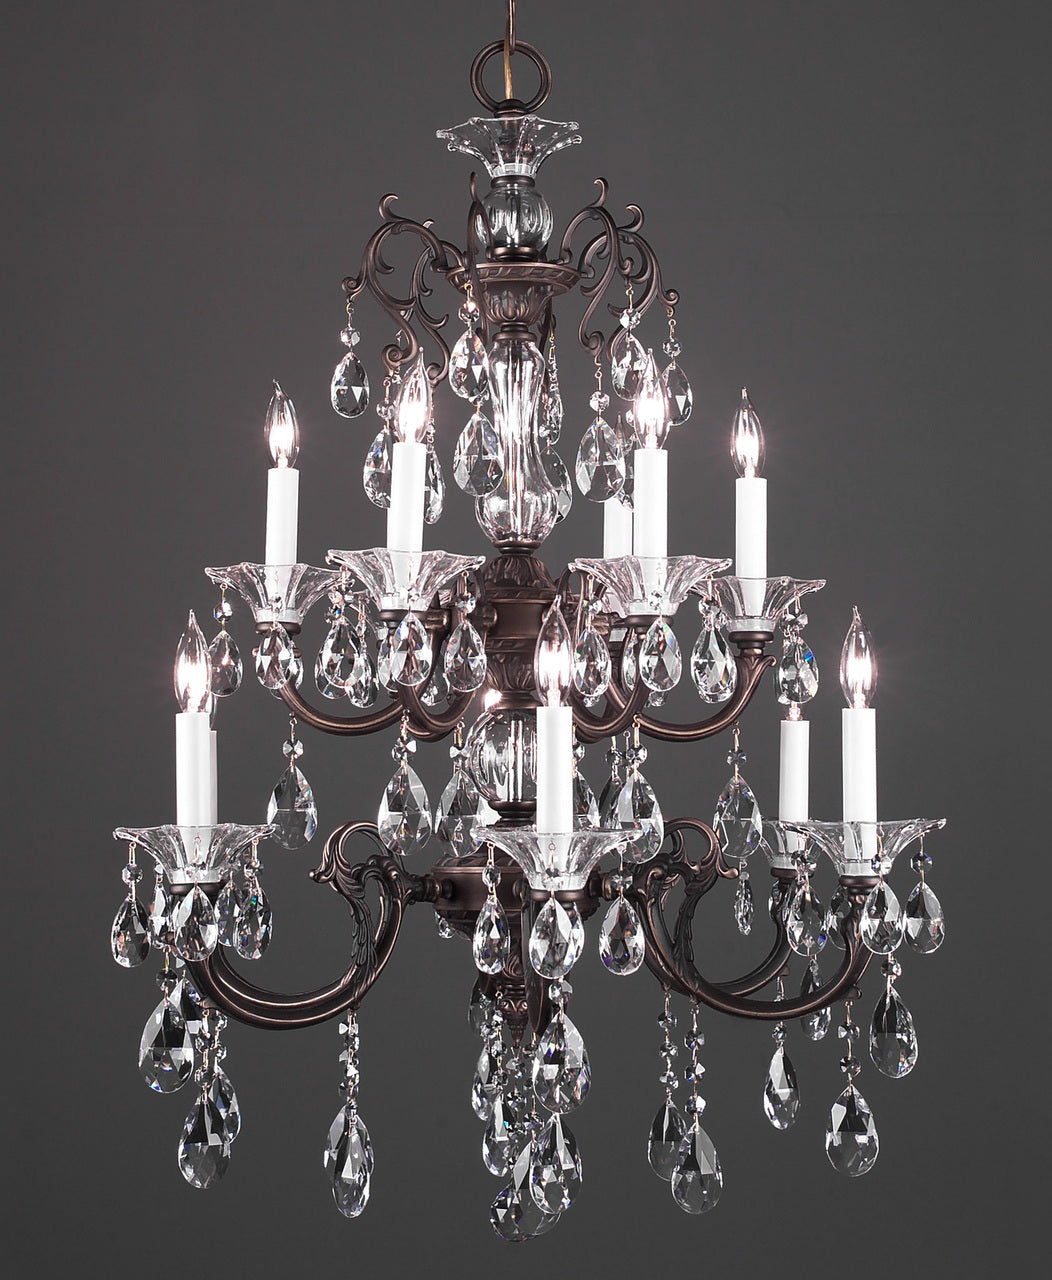 Classic Lighting 57062 RB SJT Via Lombardi Crystal Chandelier in Roman Bronze (Imported from Spain)